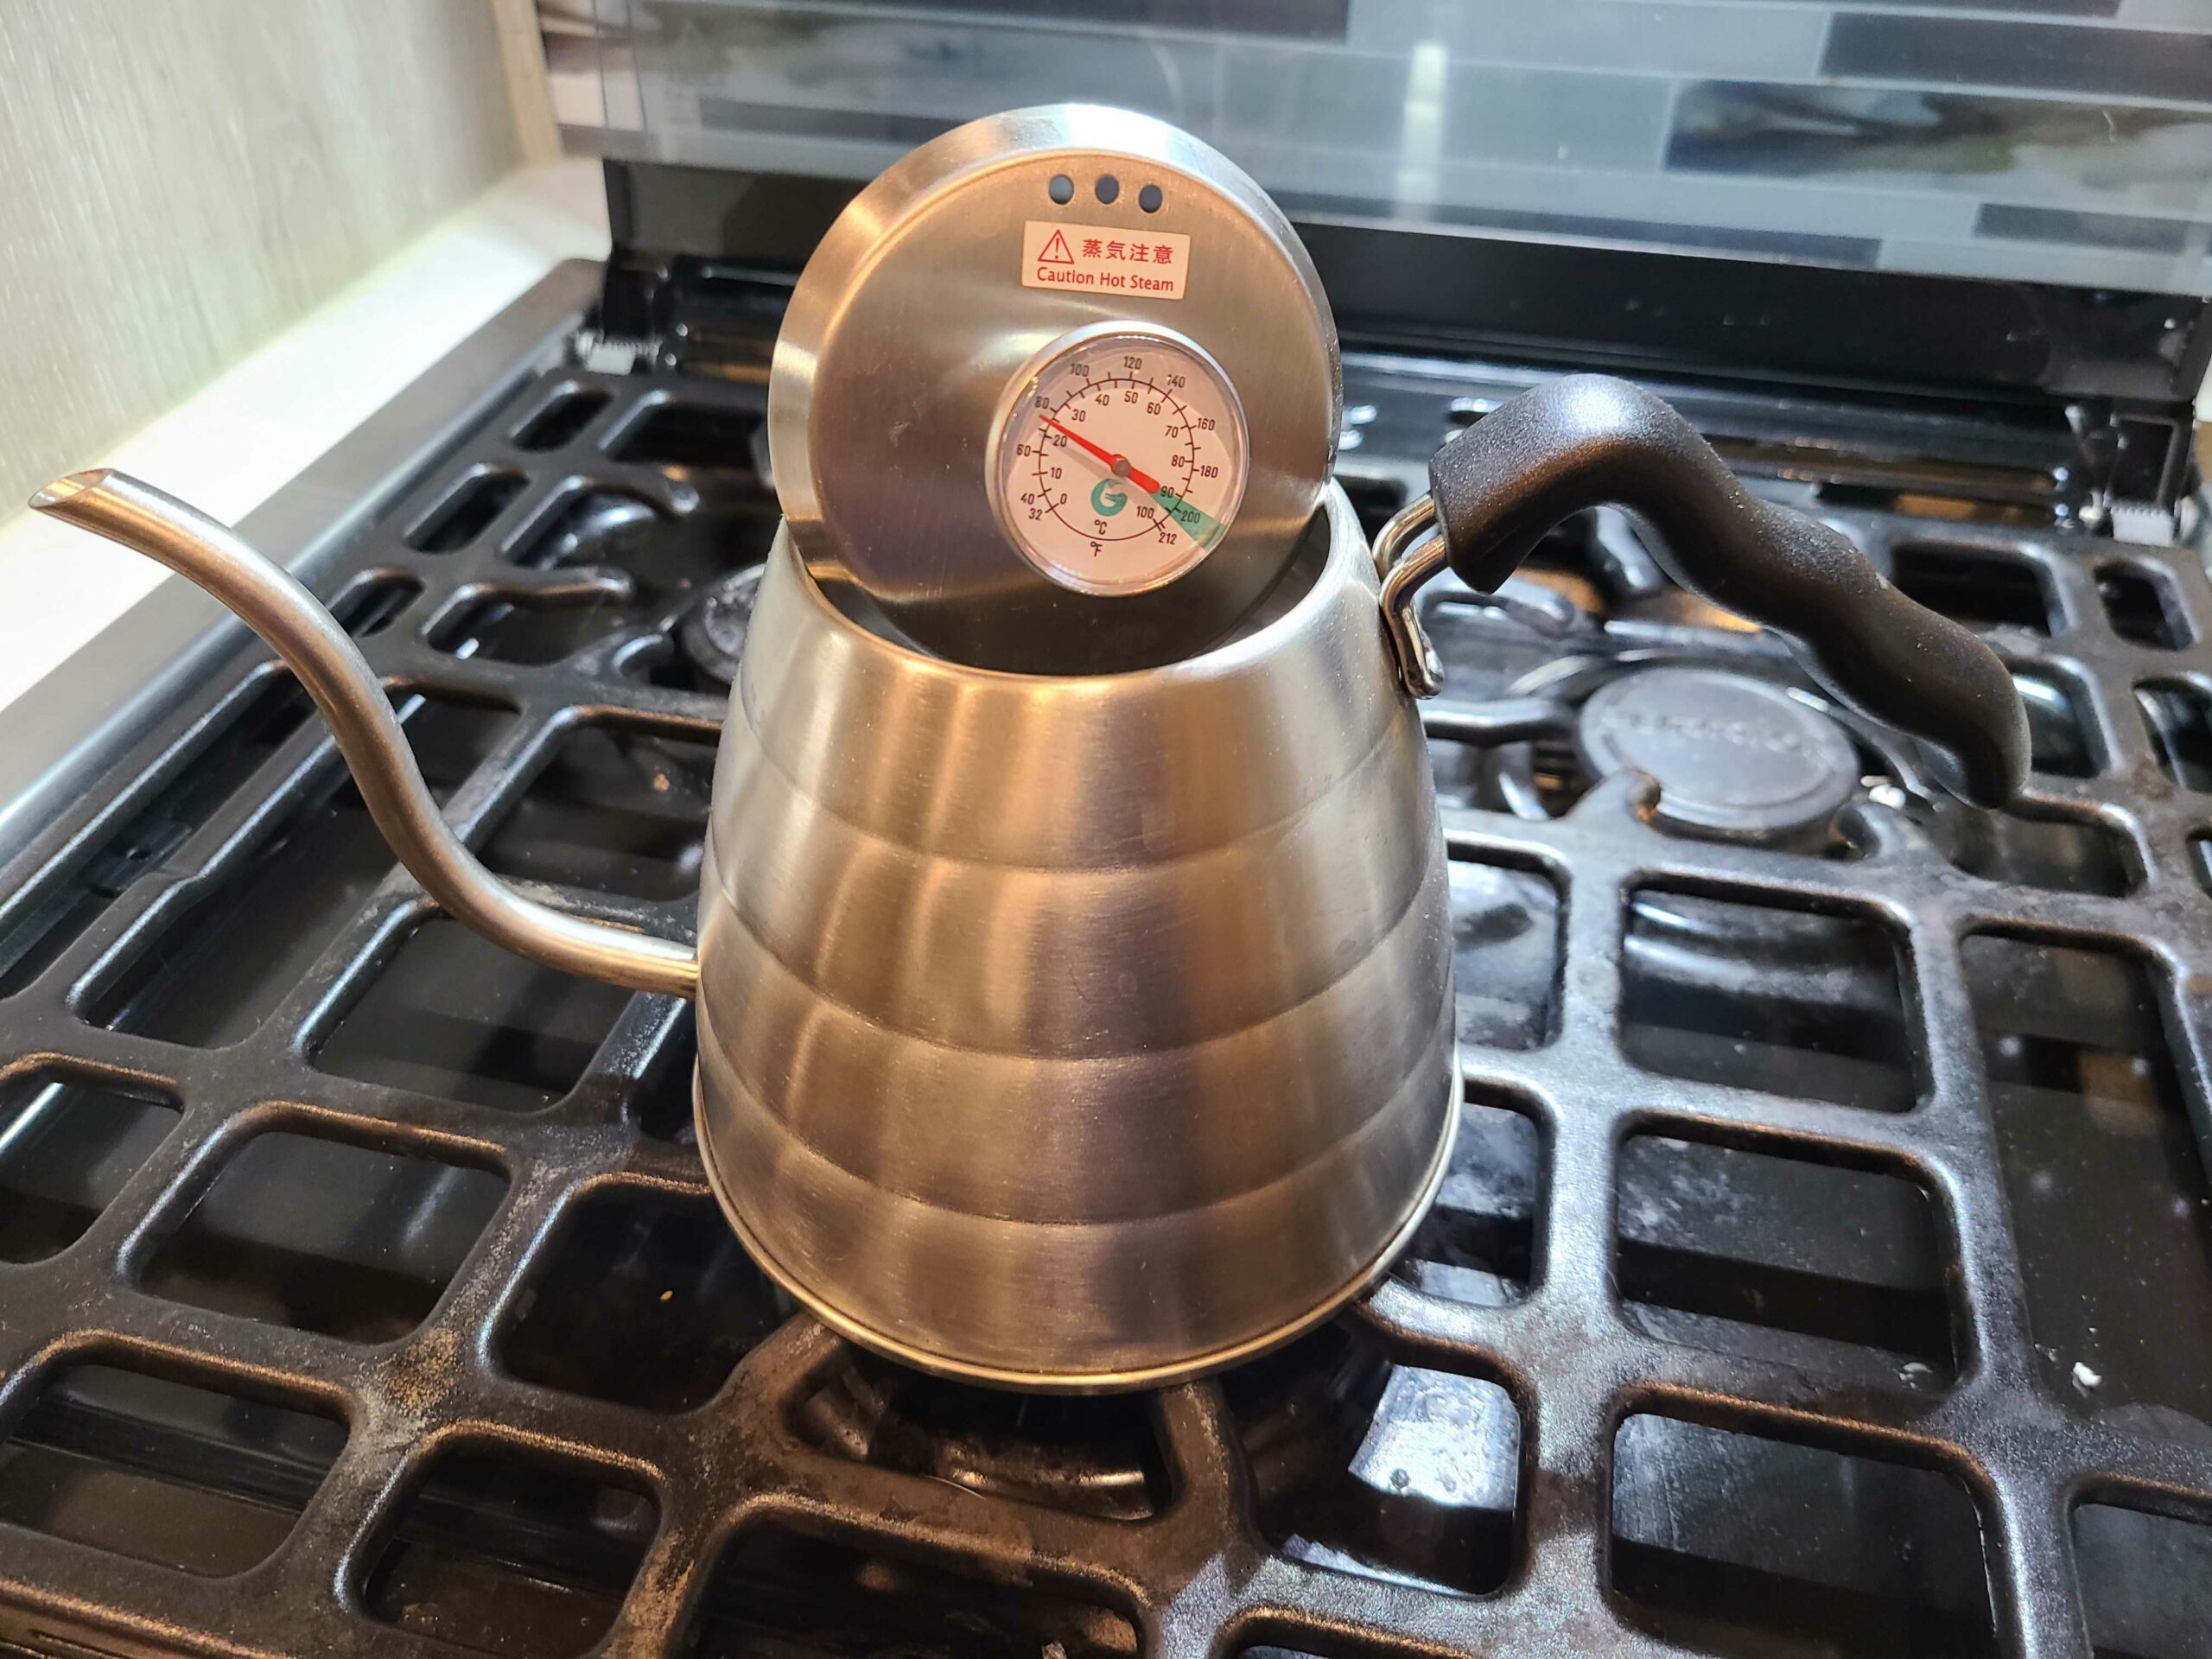 stainless steel gooseneck tea kettle on stove with thermometer lid